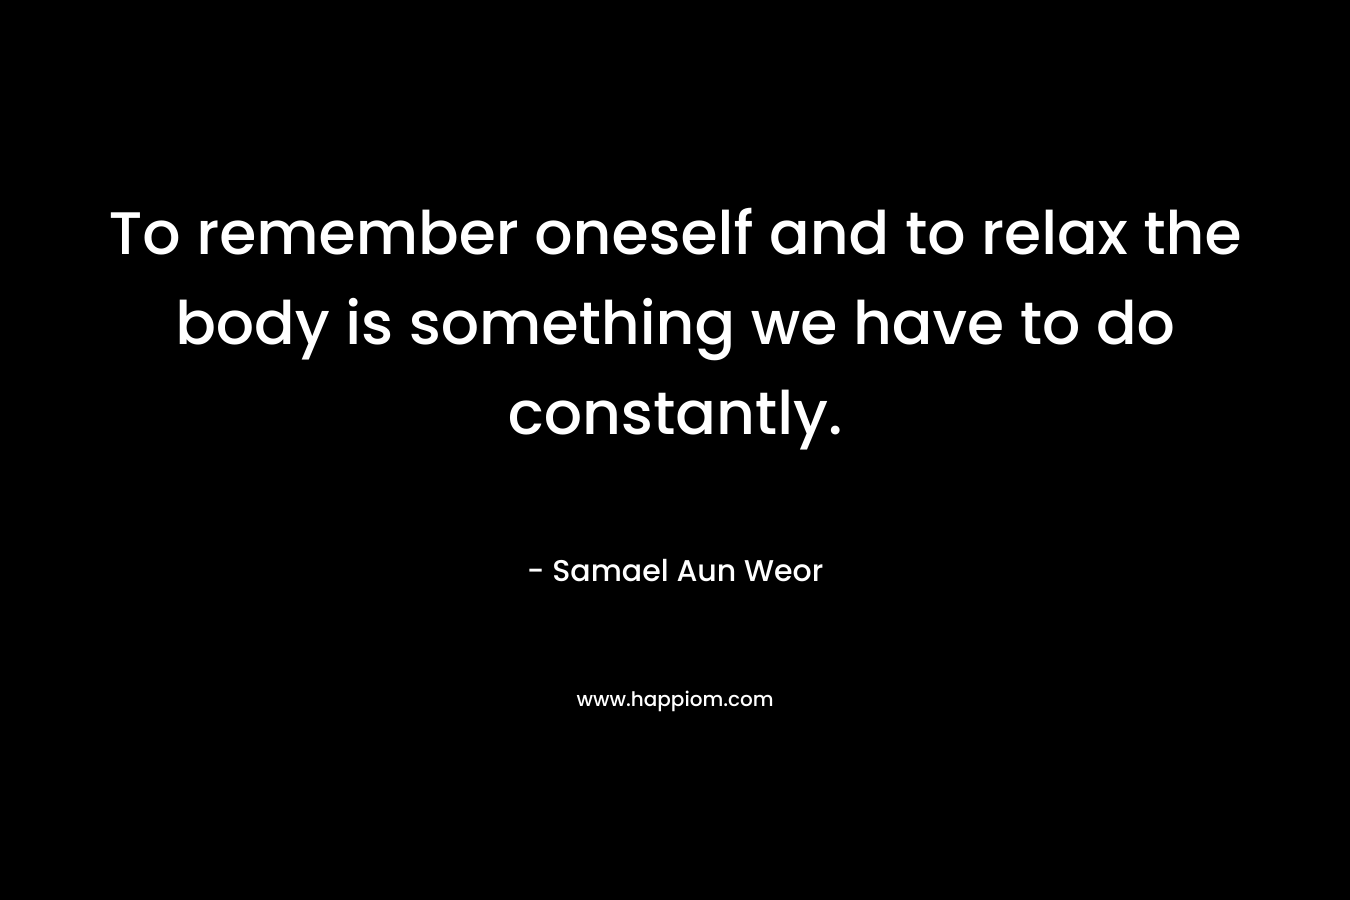 To remember oneself and to relax the body is something we have to do constantly. – Samael Aun Weor